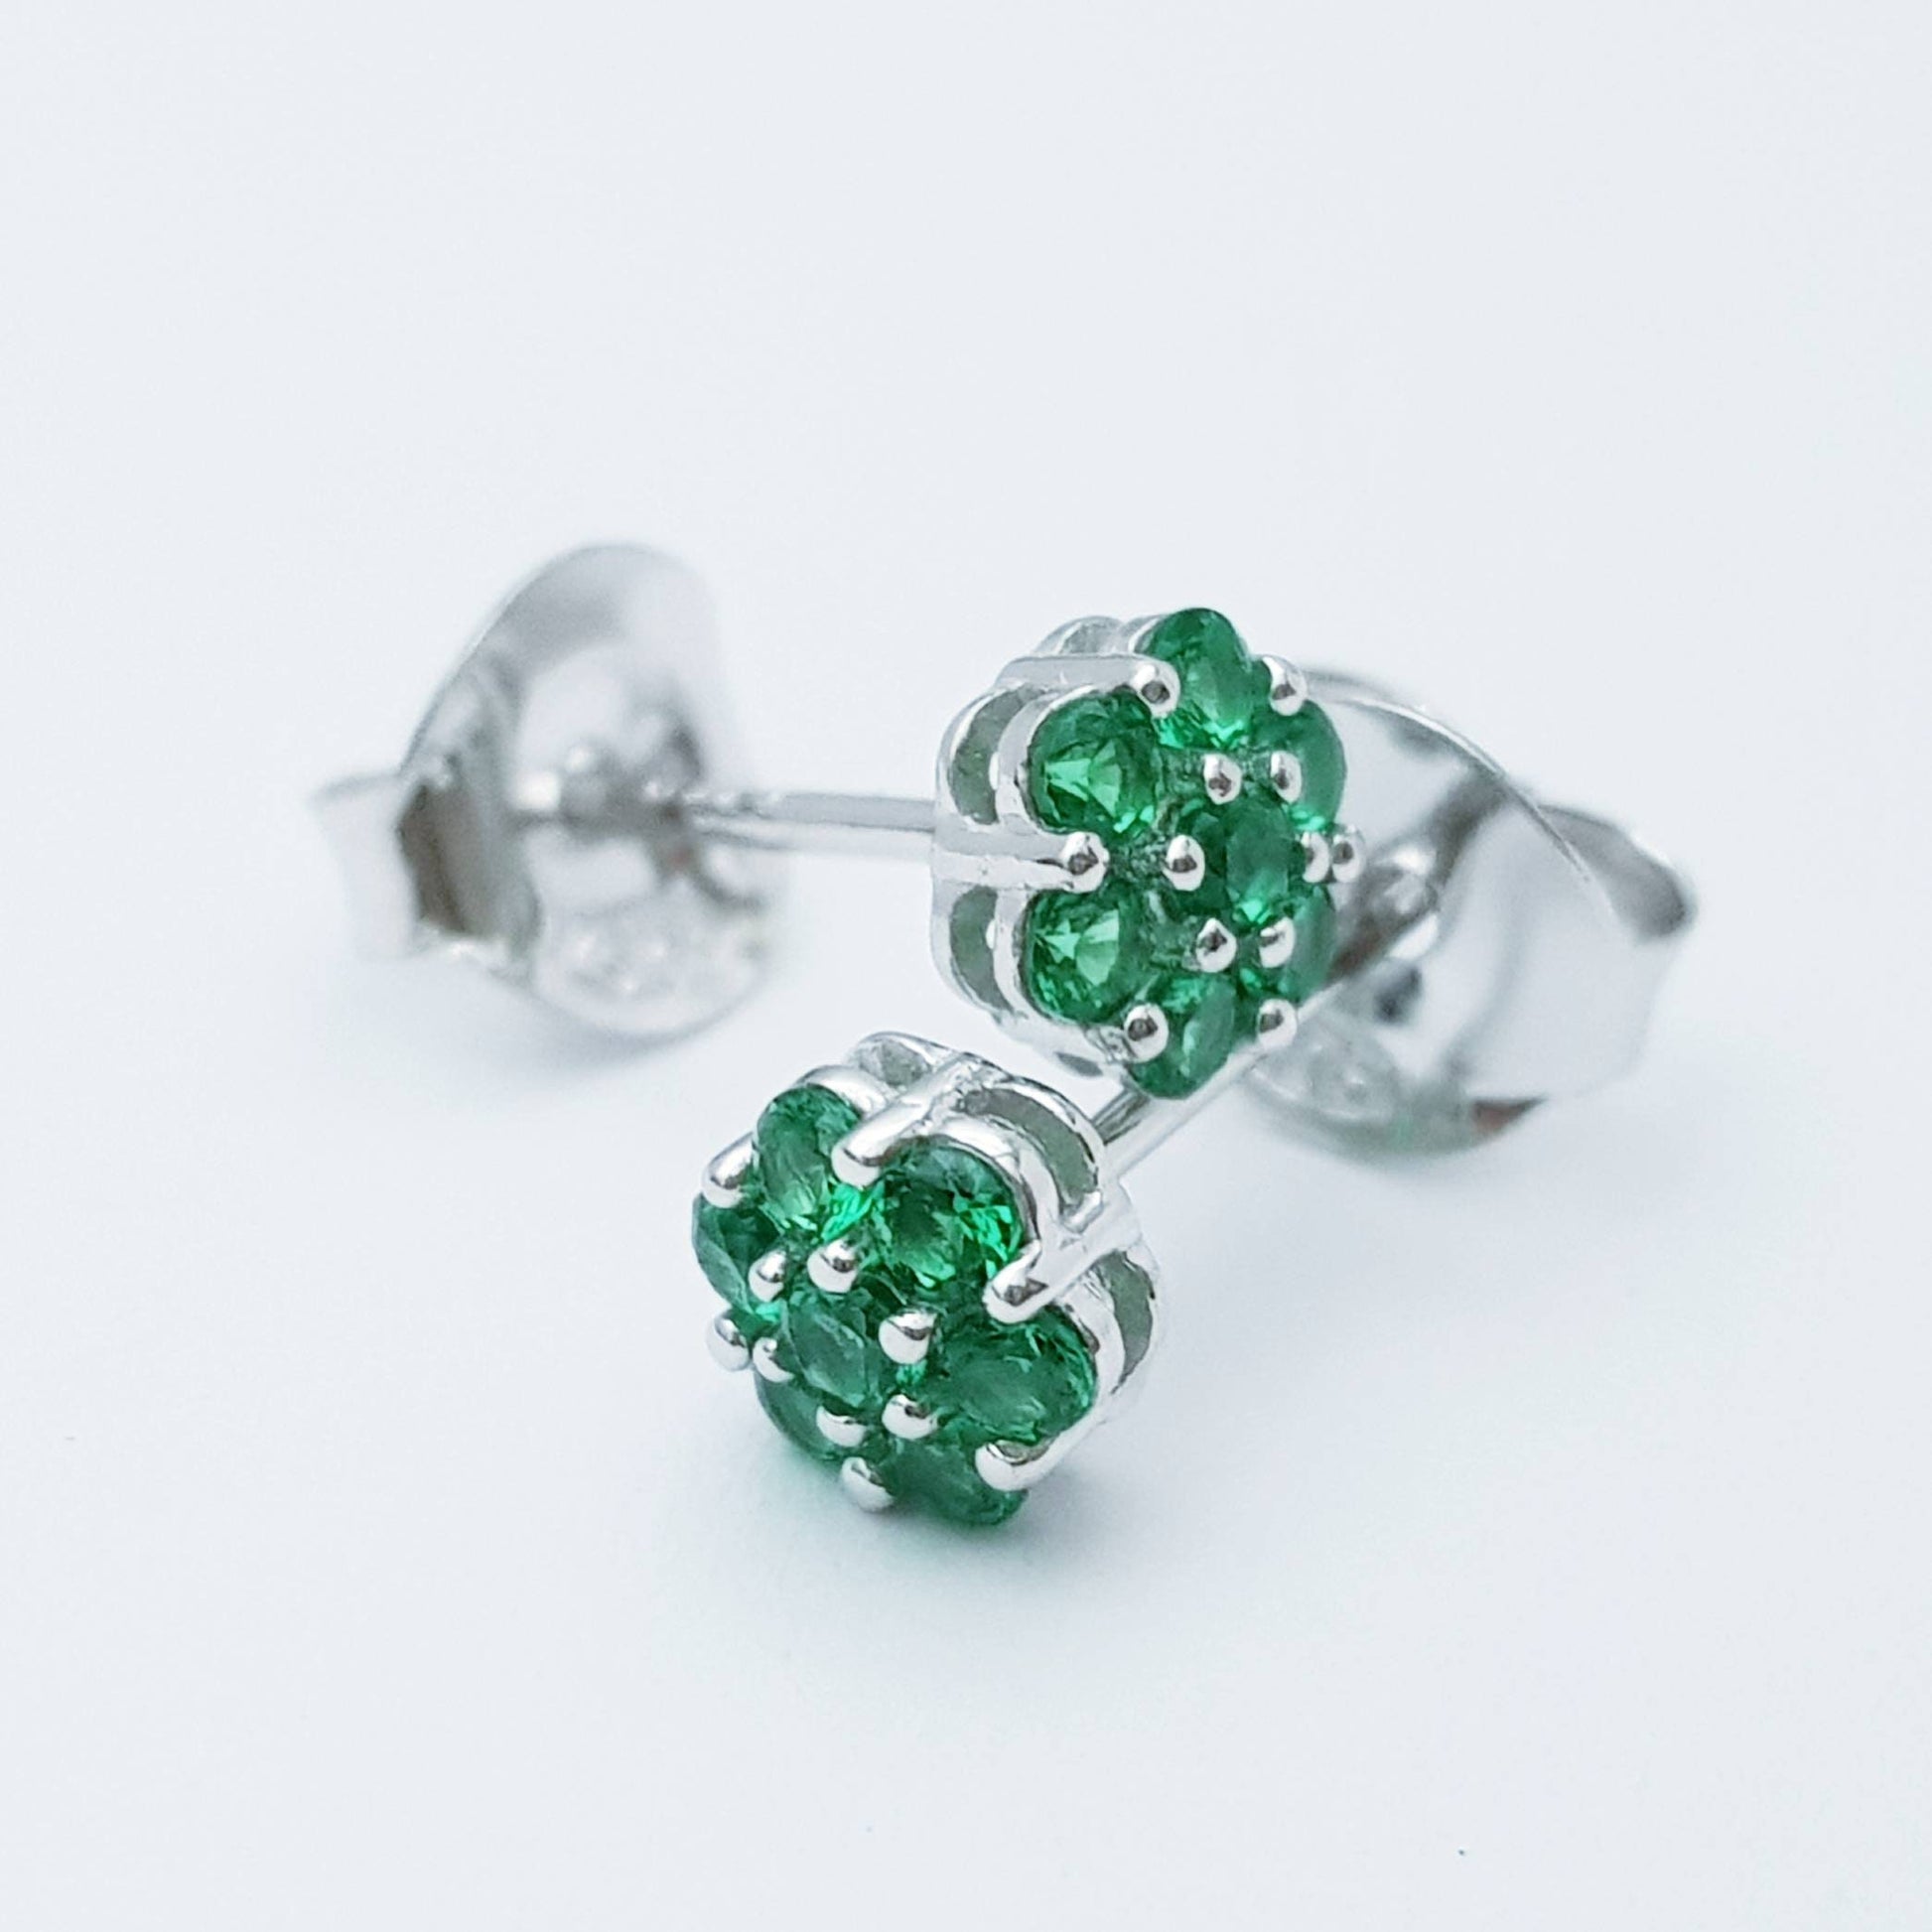 Minimal sterling silver claw set green stud earrings, second hole earring, small floral stud